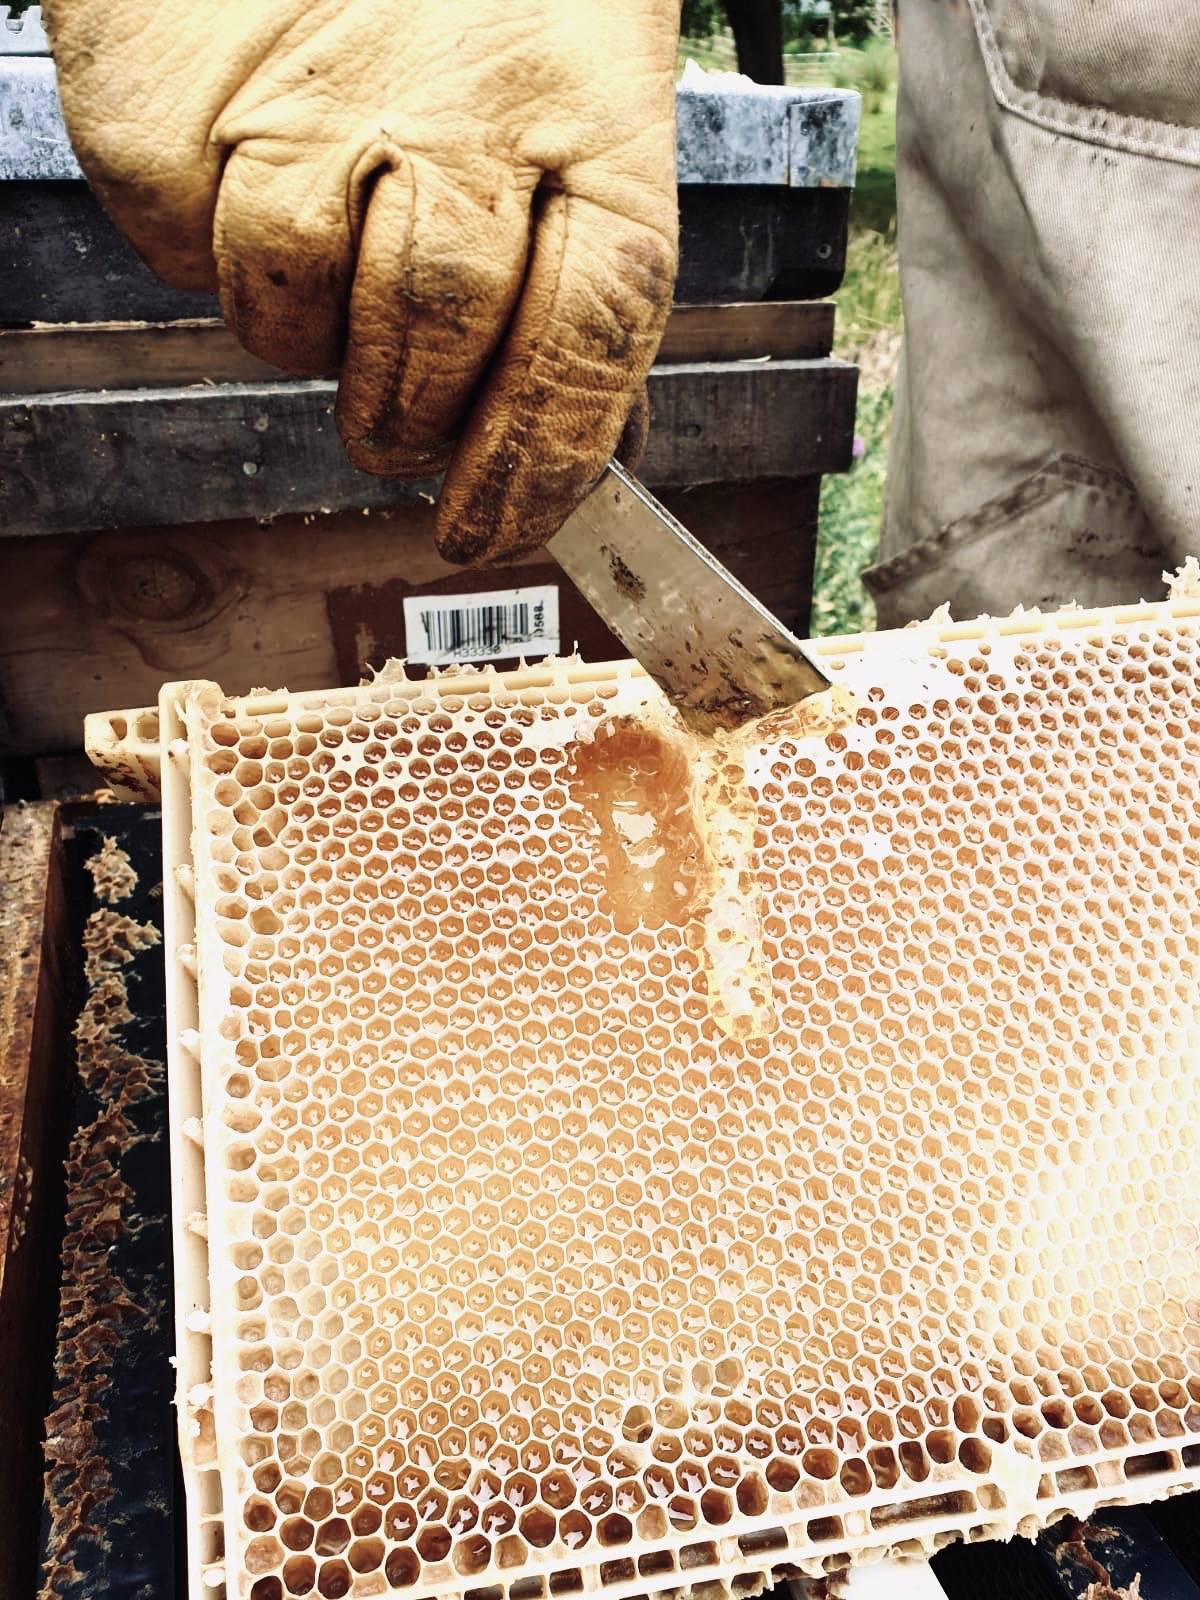 Manuka Honey being extracted from the hive